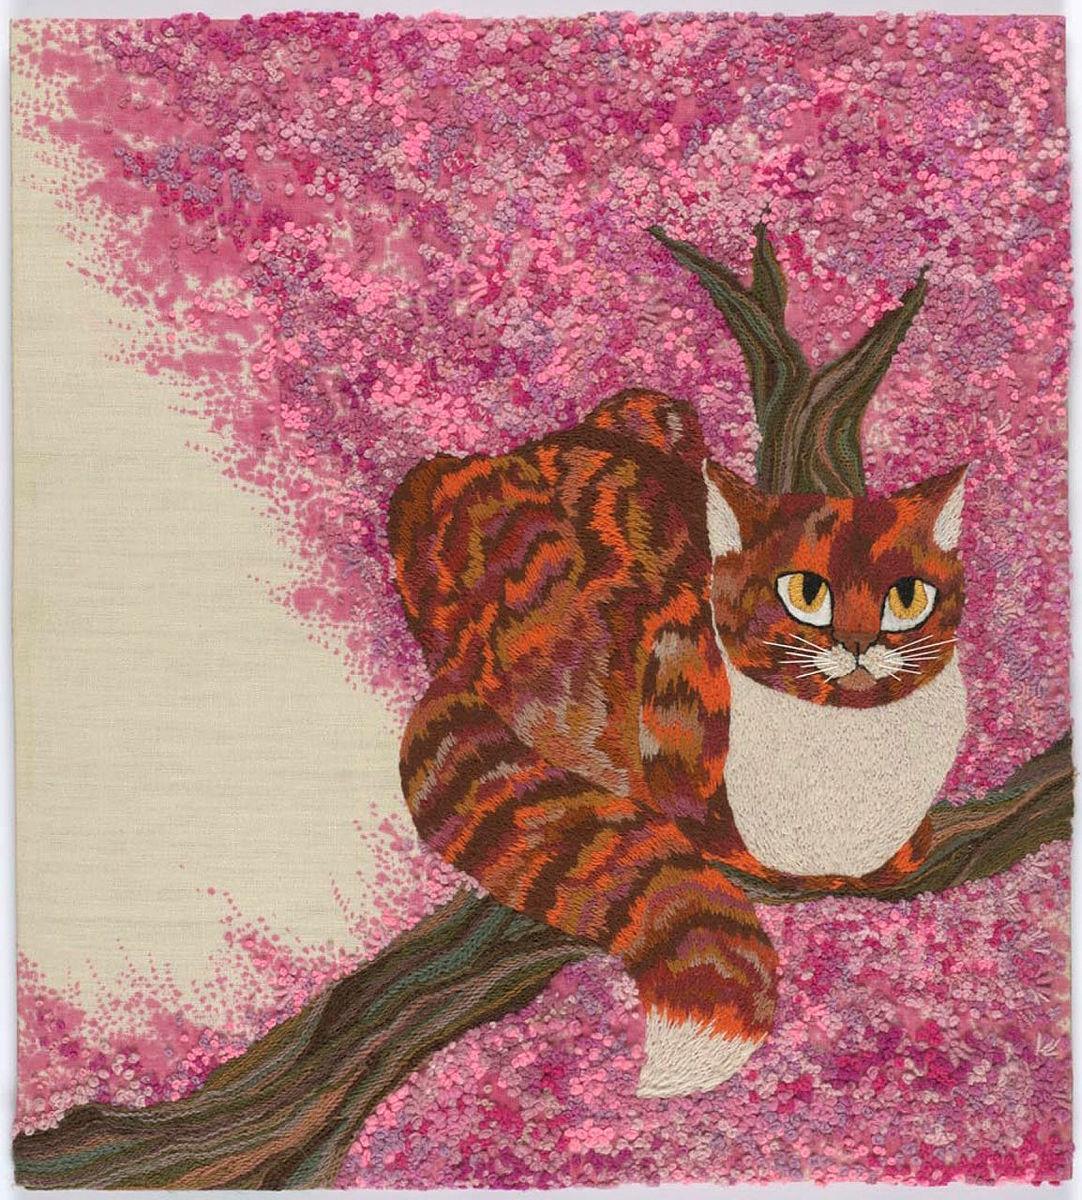 Artwork Wallhanging: Cat in a peach tree this artwork made of Appliqued and dyed Irish linen with wool and silk embroidery, created in 1980-01-01